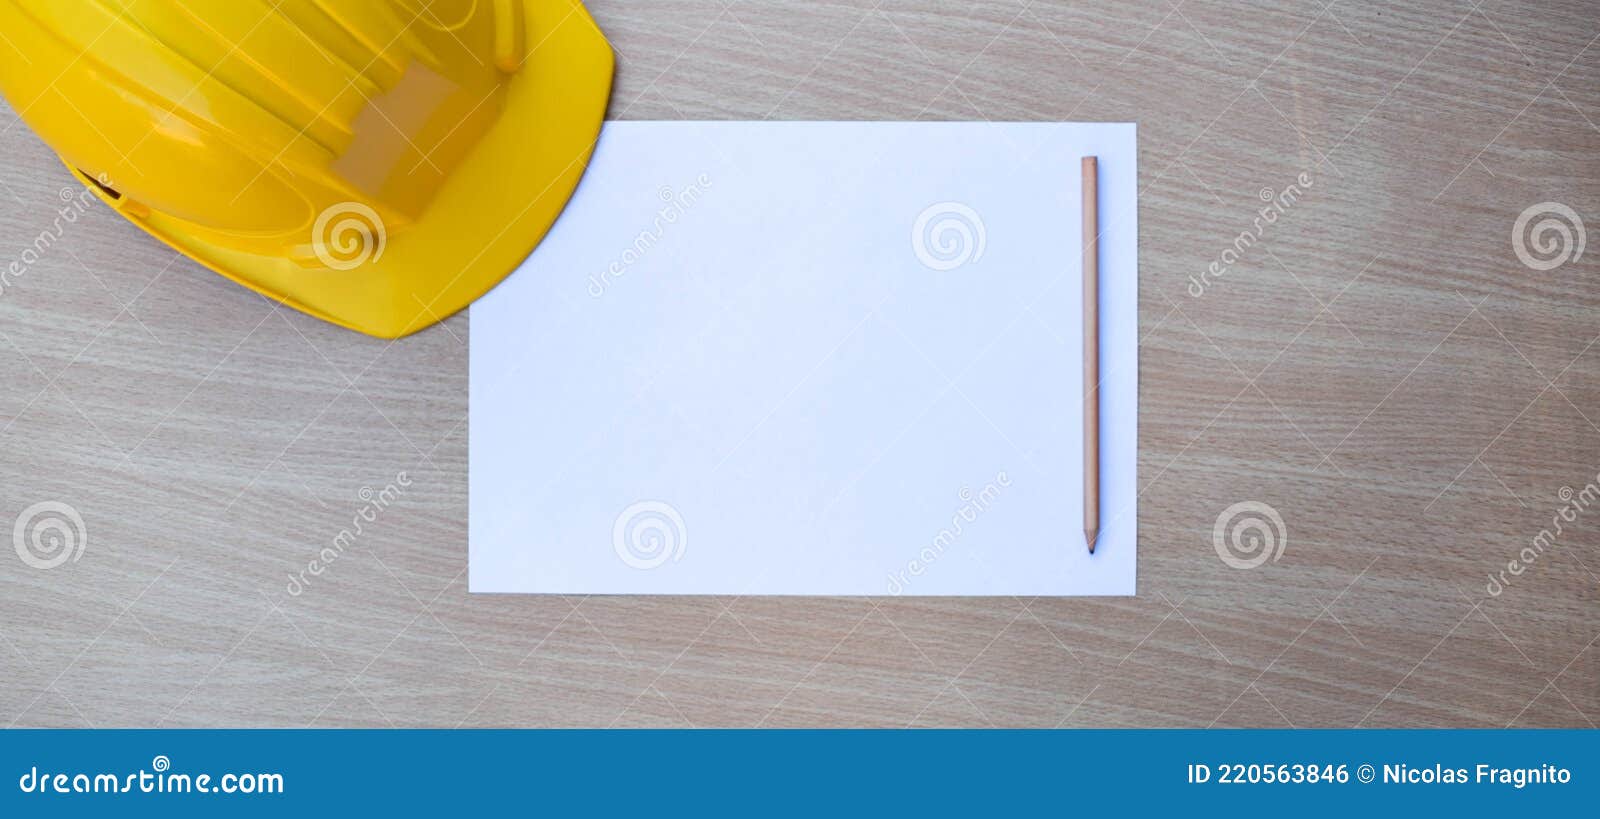 blank paper, yellow safety helmet and pencil on wood table background. top view with copy space for text or any 